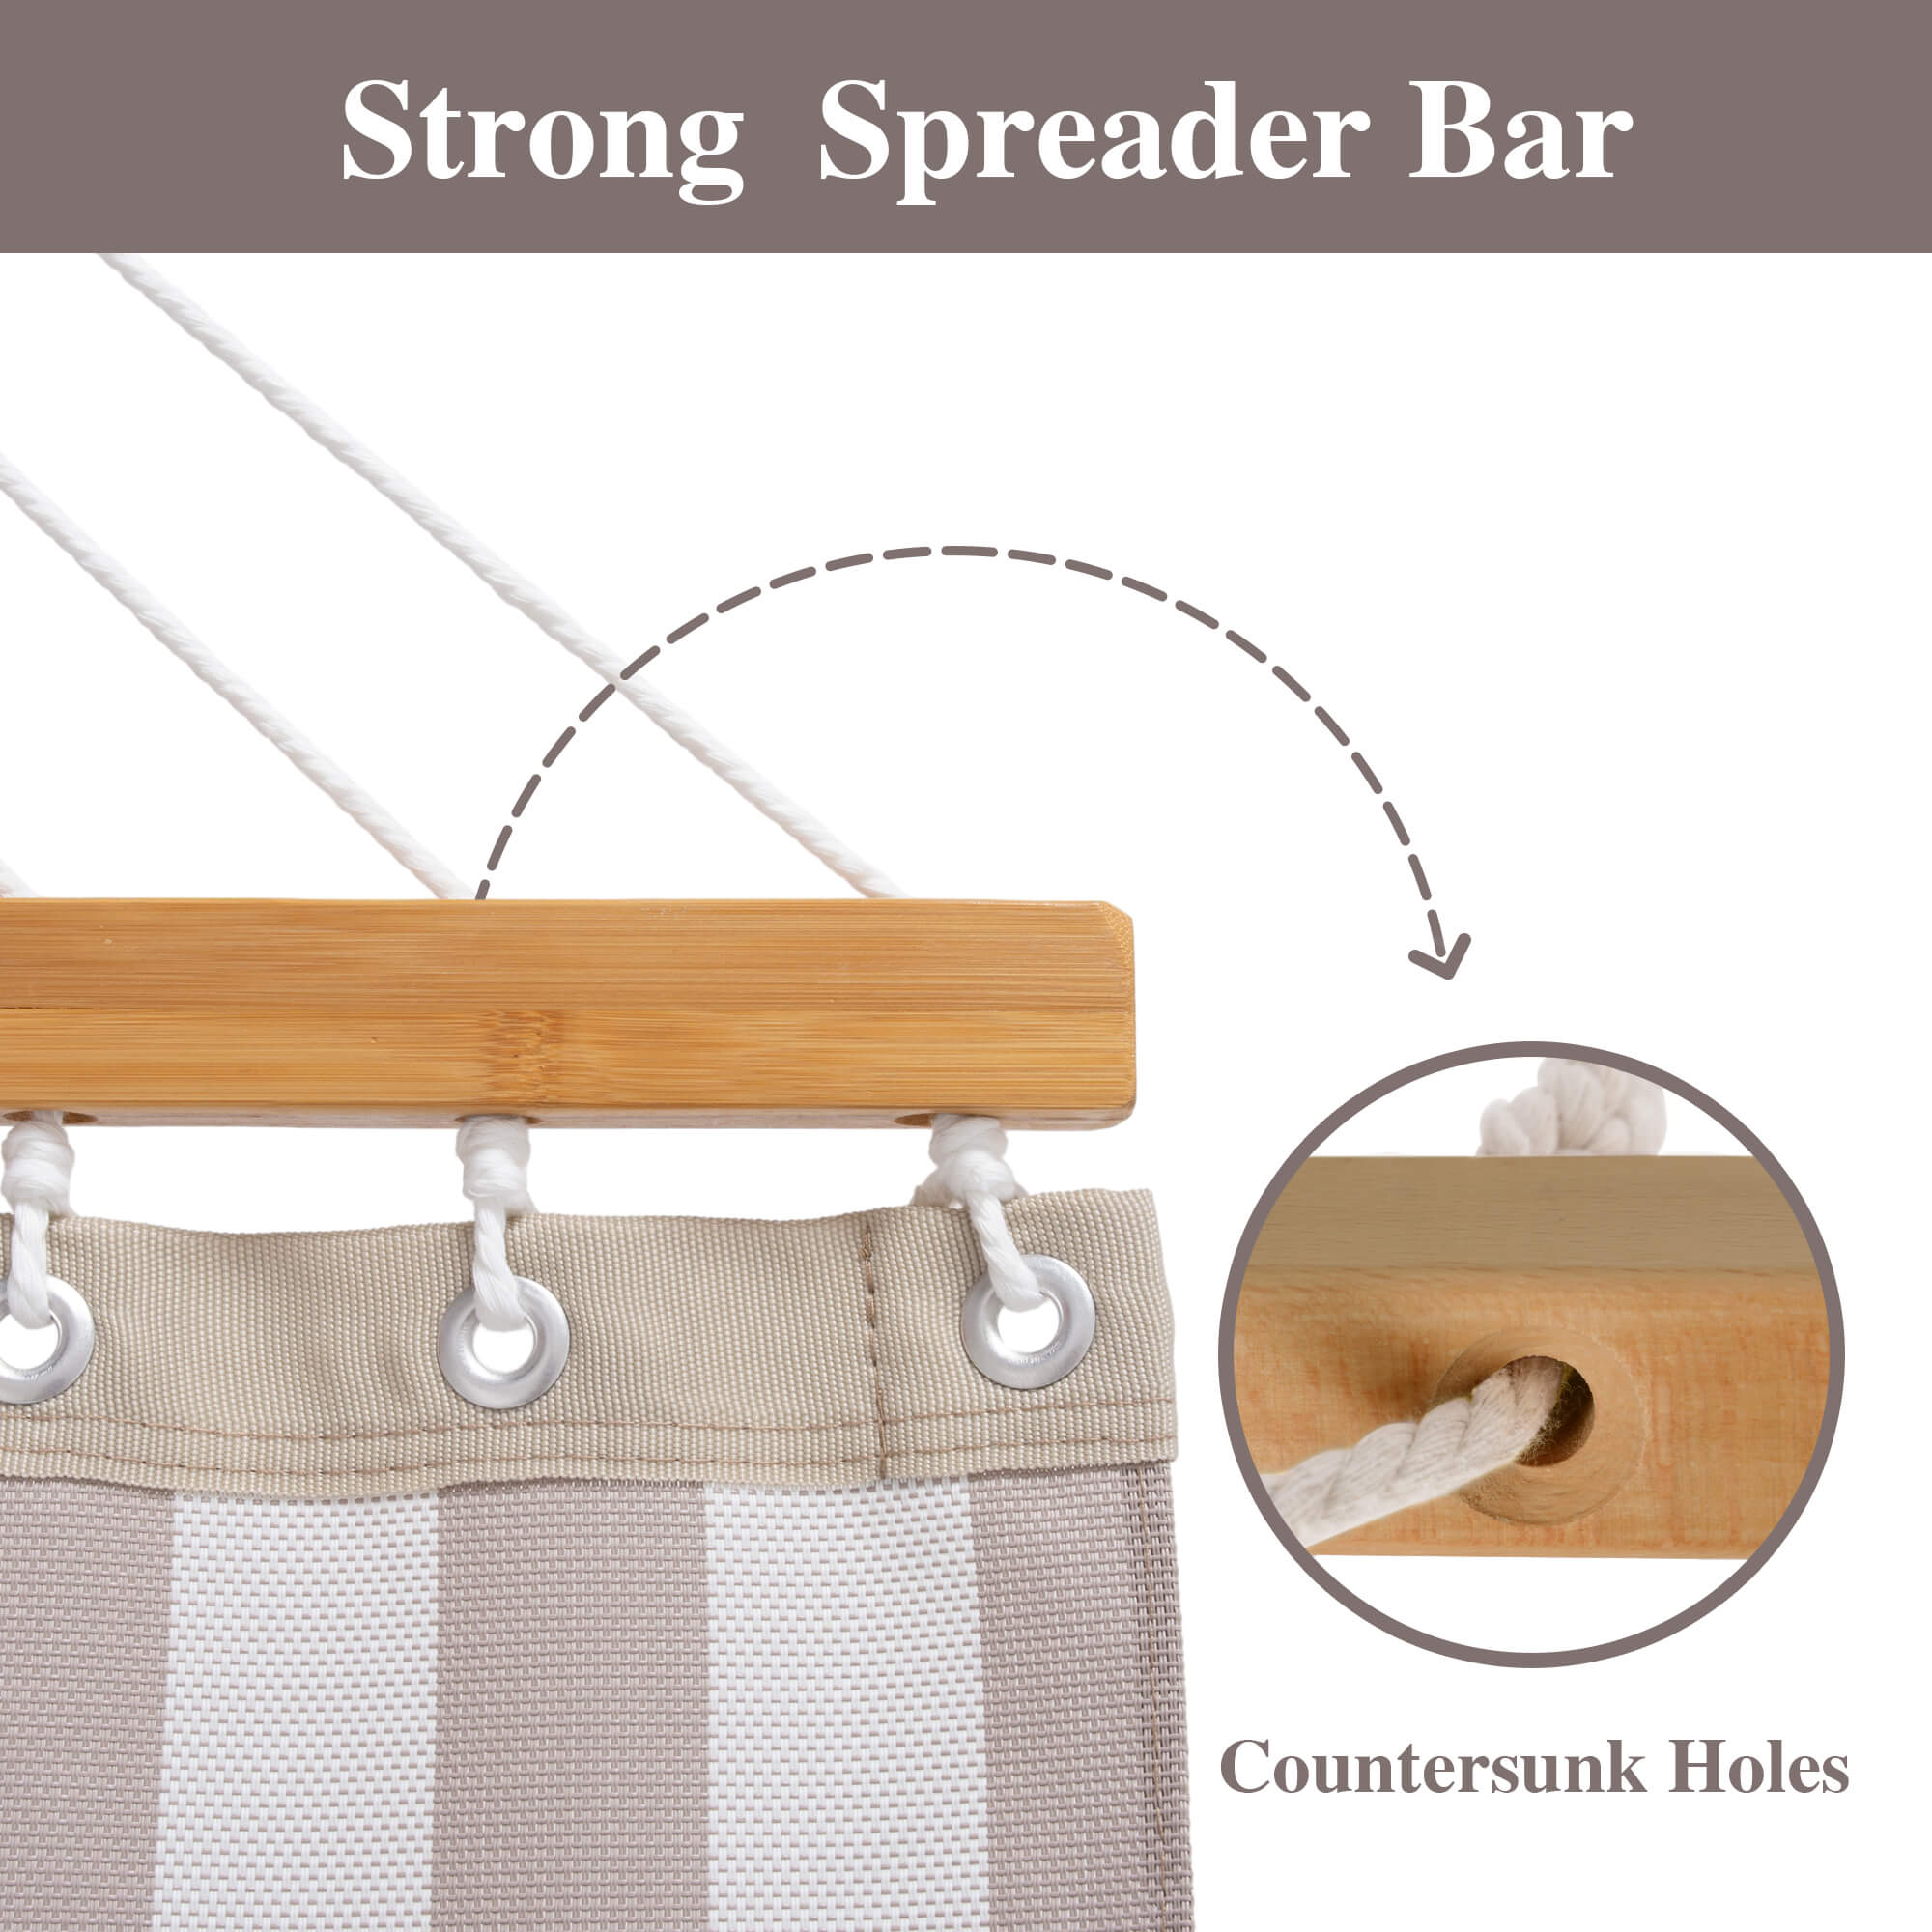 SUNCREAT-quick-dry-hammock-with-stand-light-brown-stripes#color_light-brown-stripes